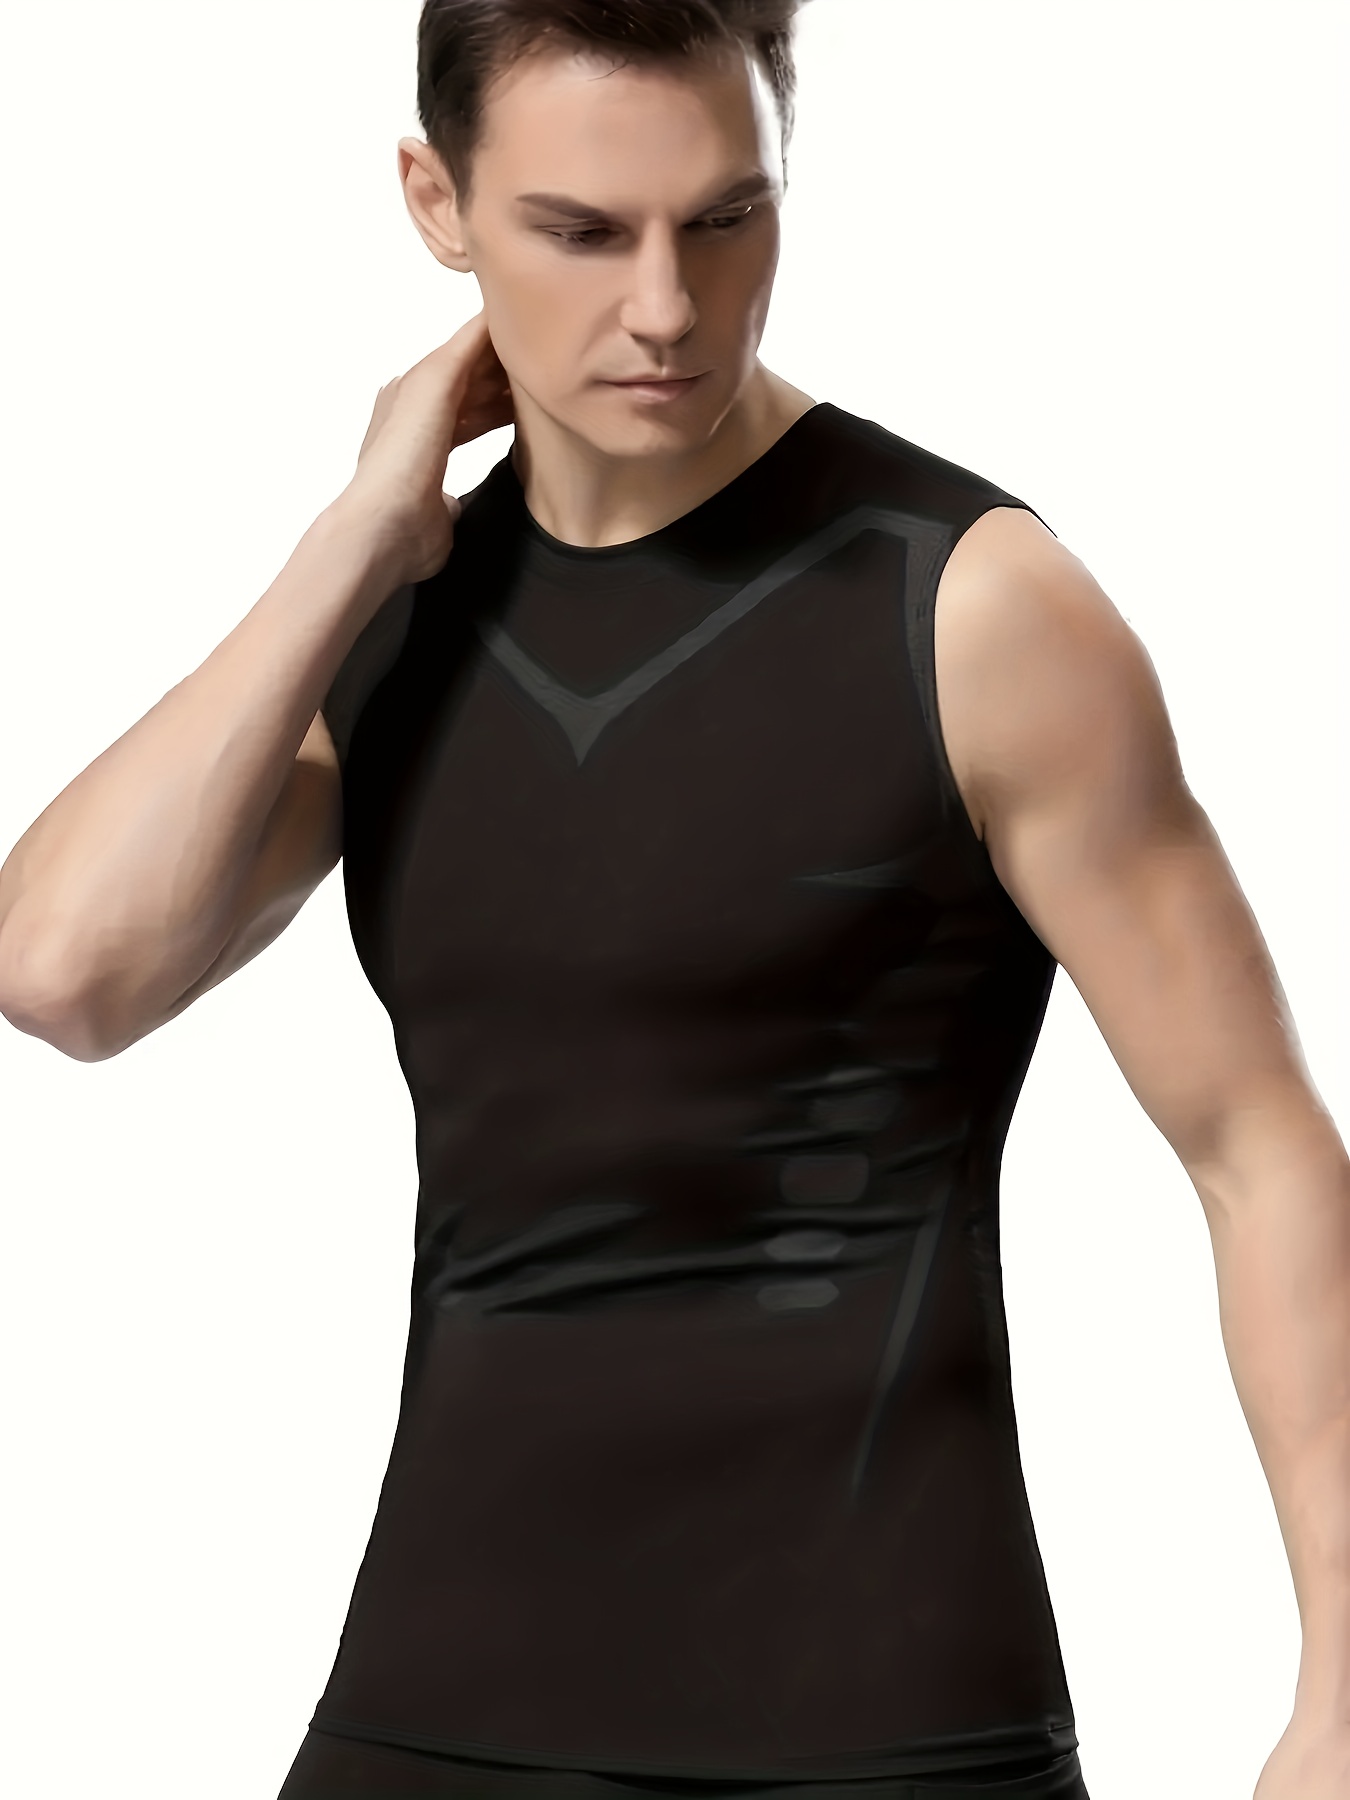 Sleeveless Compression Shirt for Men, Quick-drying Athletic